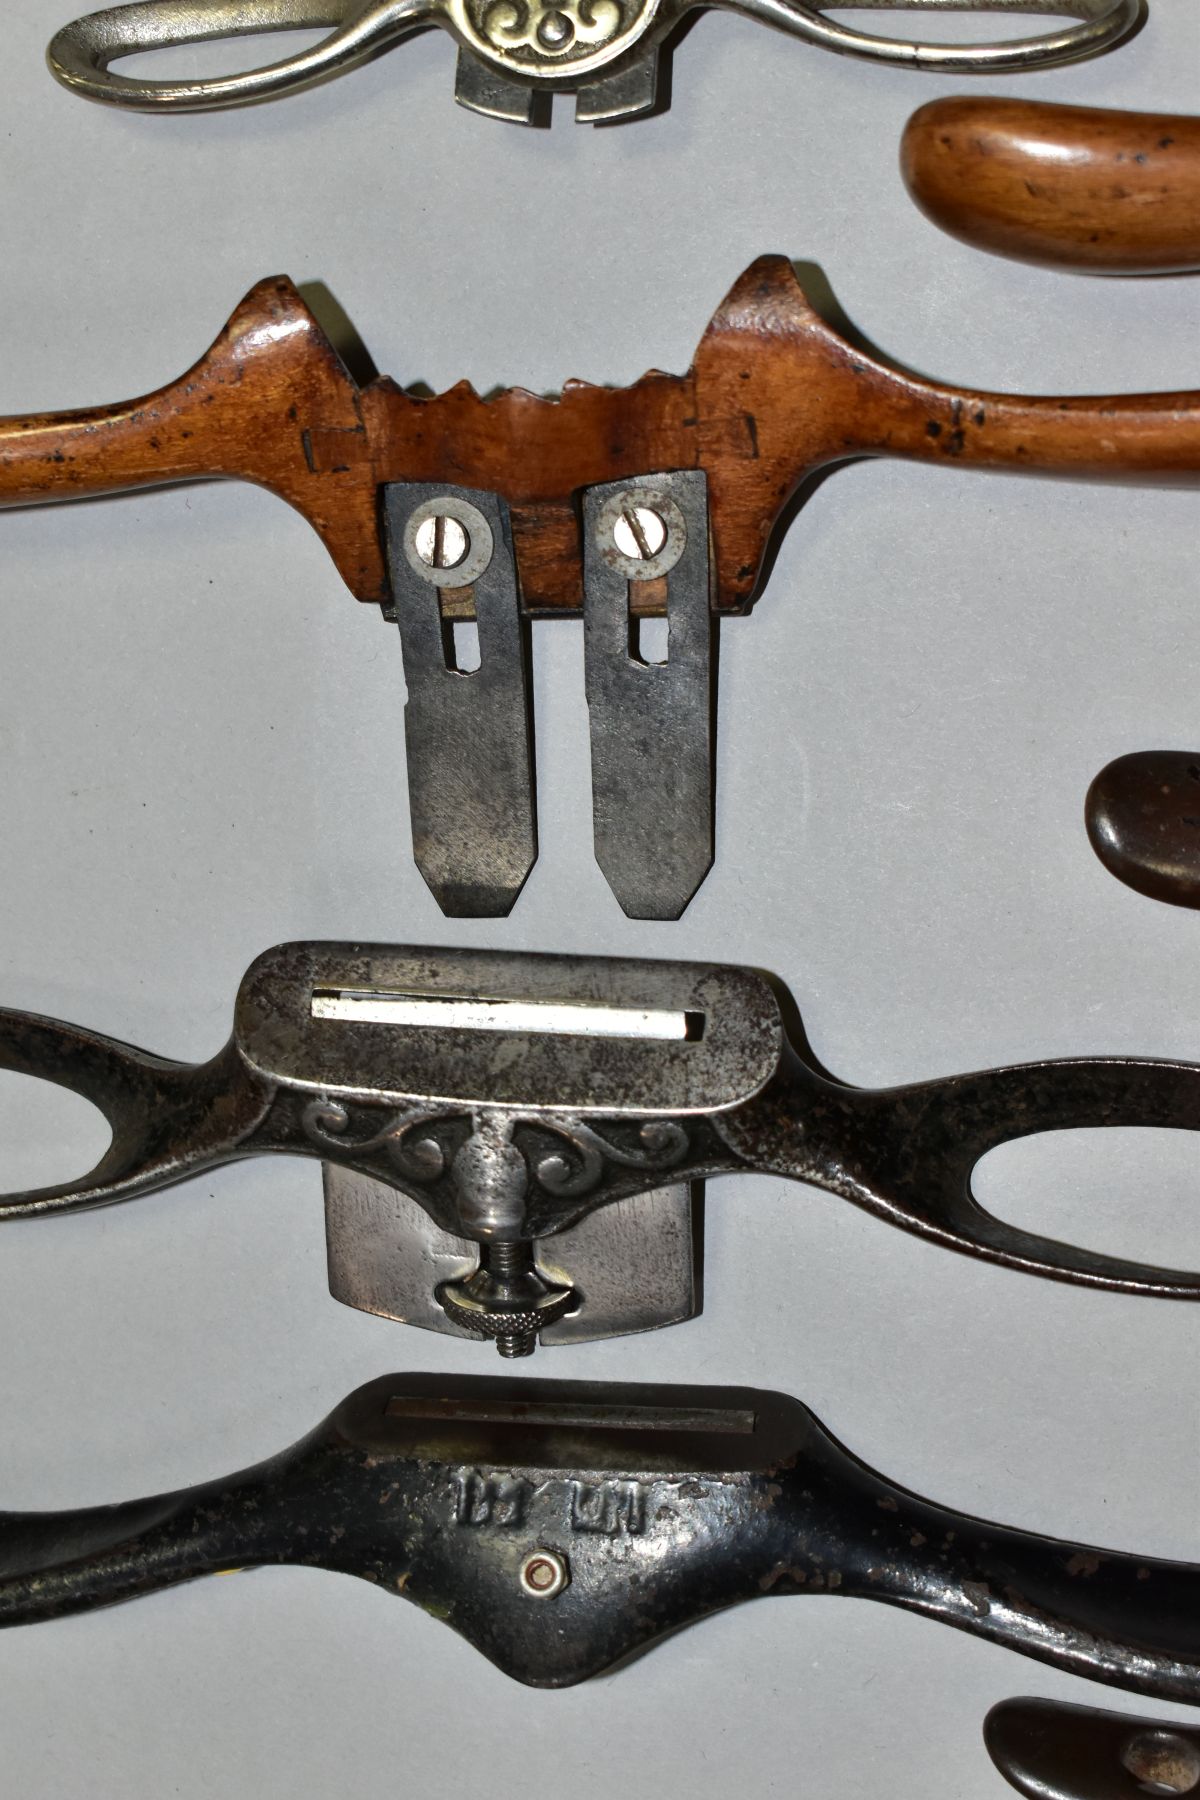 A TRAY CONTAINING EIGHT SPOKESHAVES, including two fruitwood Ovolo Sash Shaves (one left hand and - Image 7 of 8